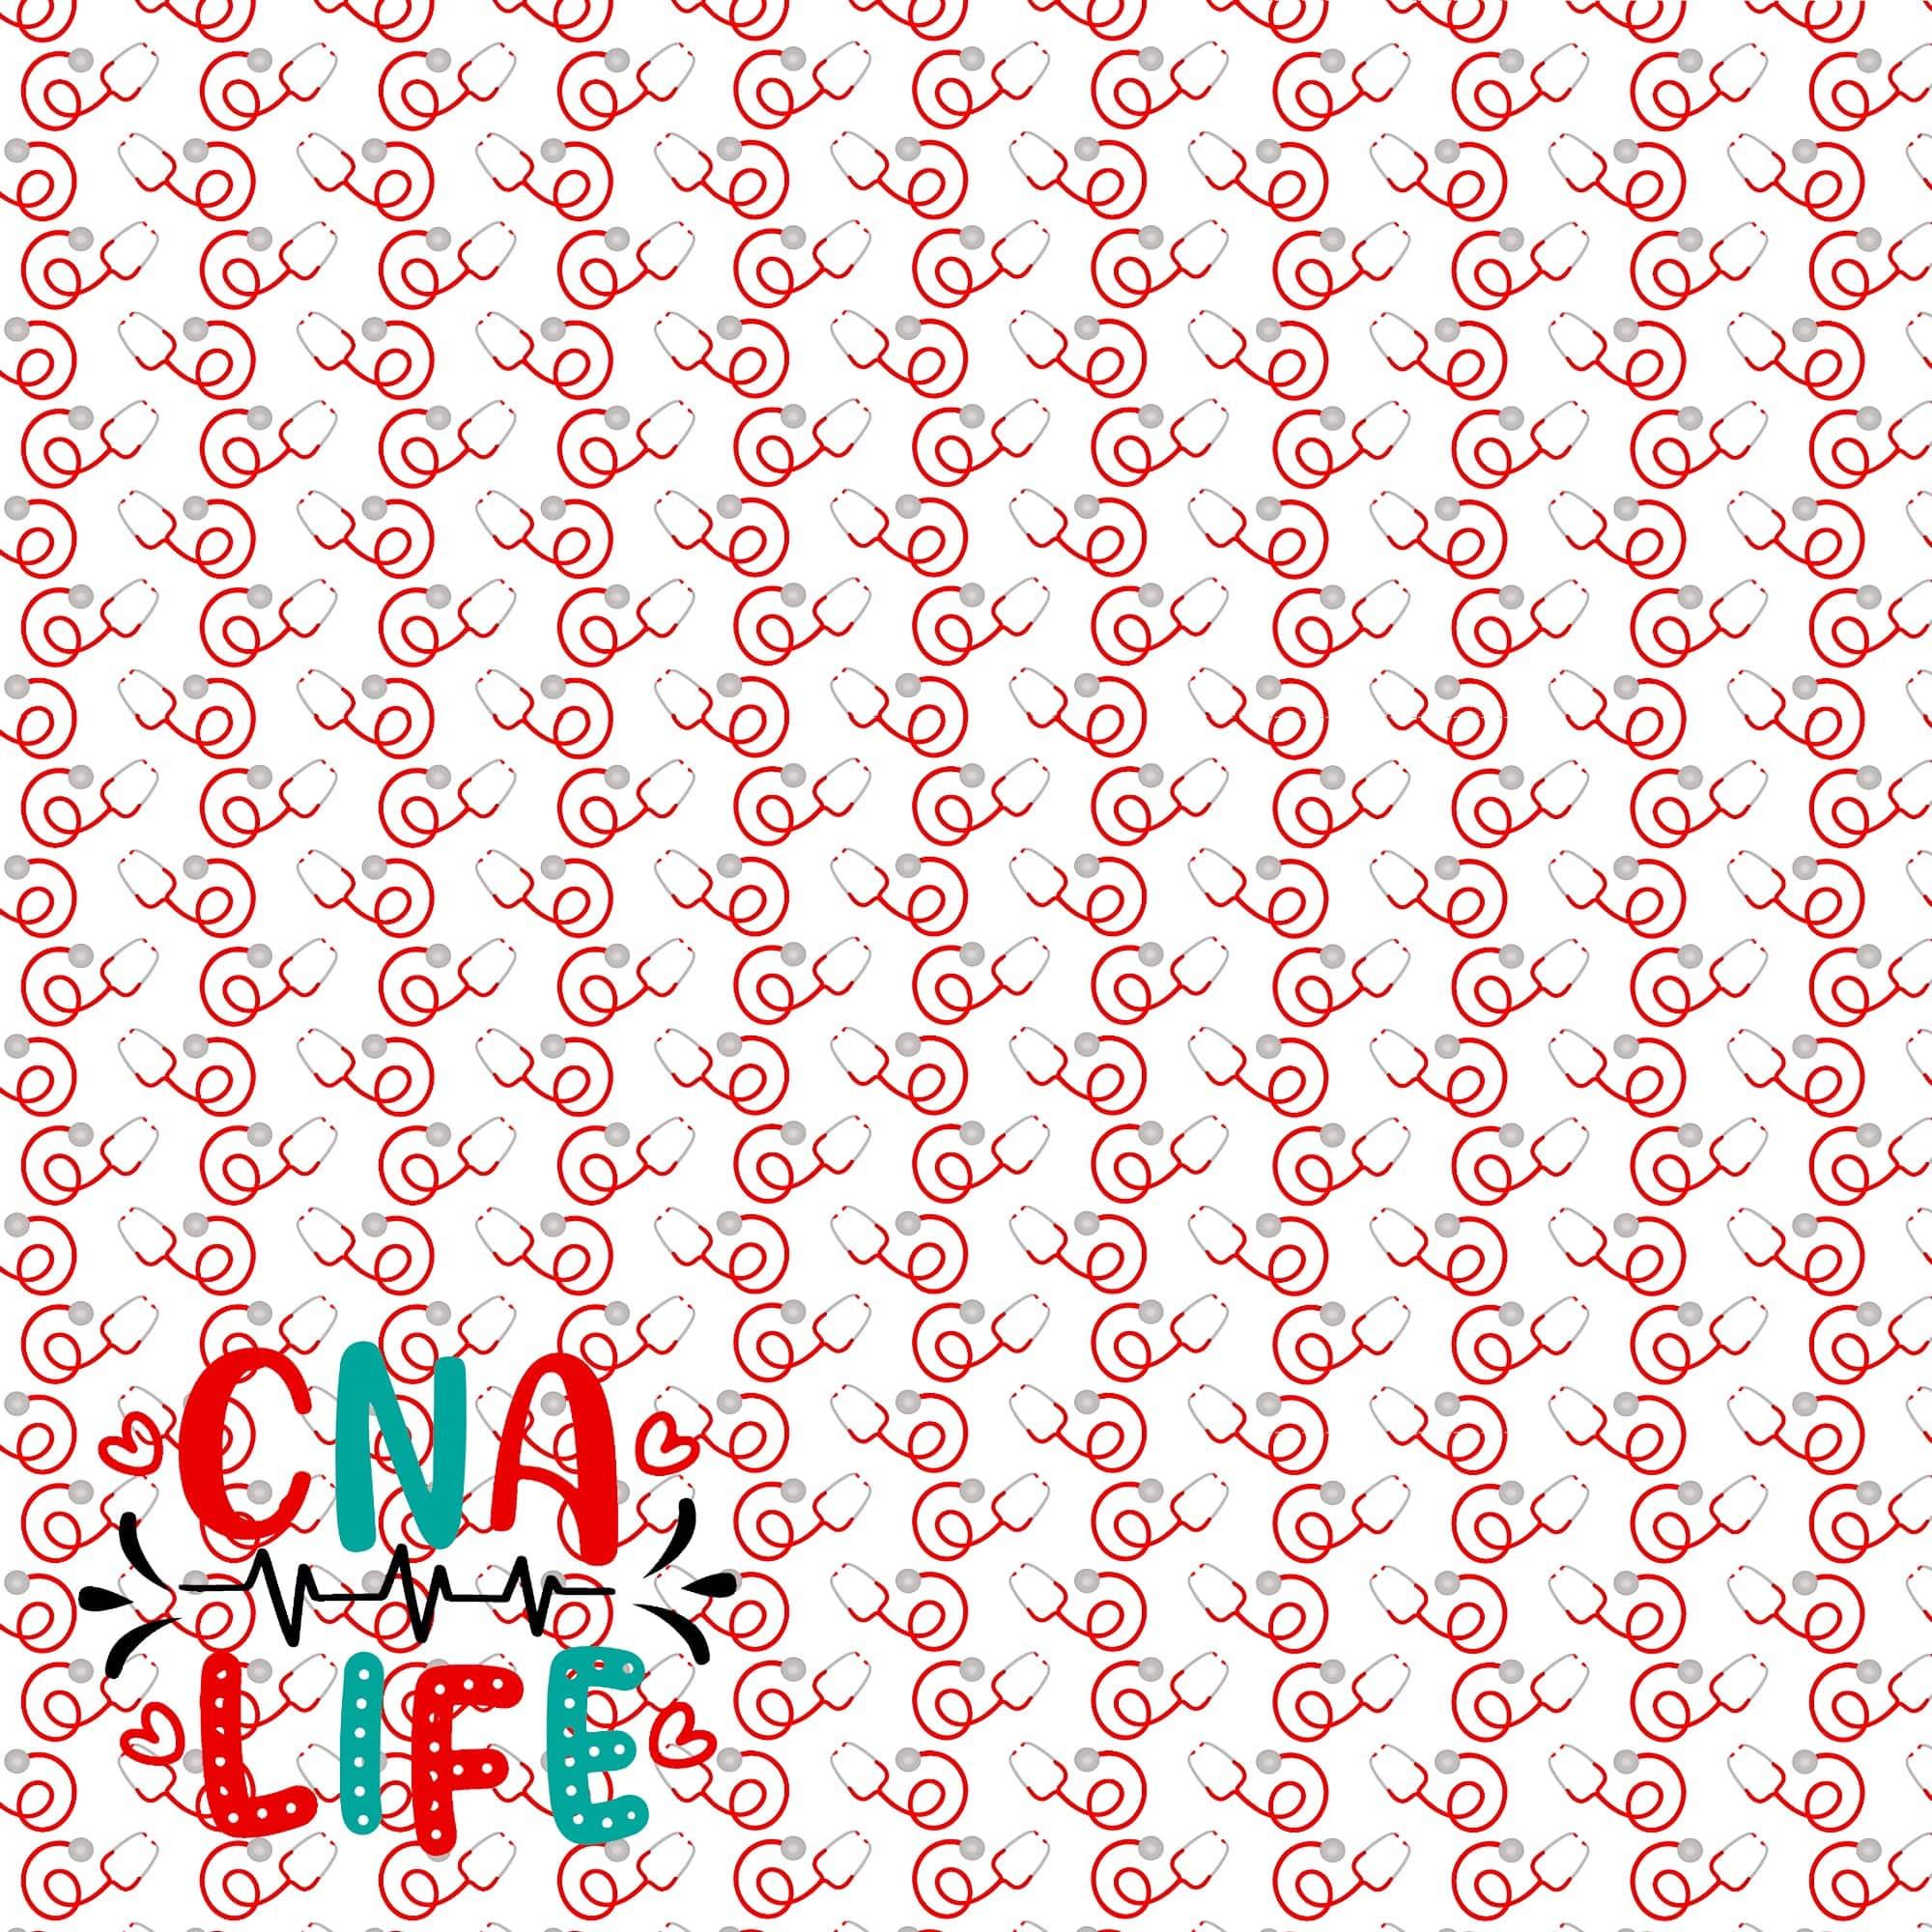 Occupation Collection CNA Life Certified Nursing Assistant 12 x 12 Double Sided Scrapbook Paper by SSC Designs - Scrapbook Supply Companies